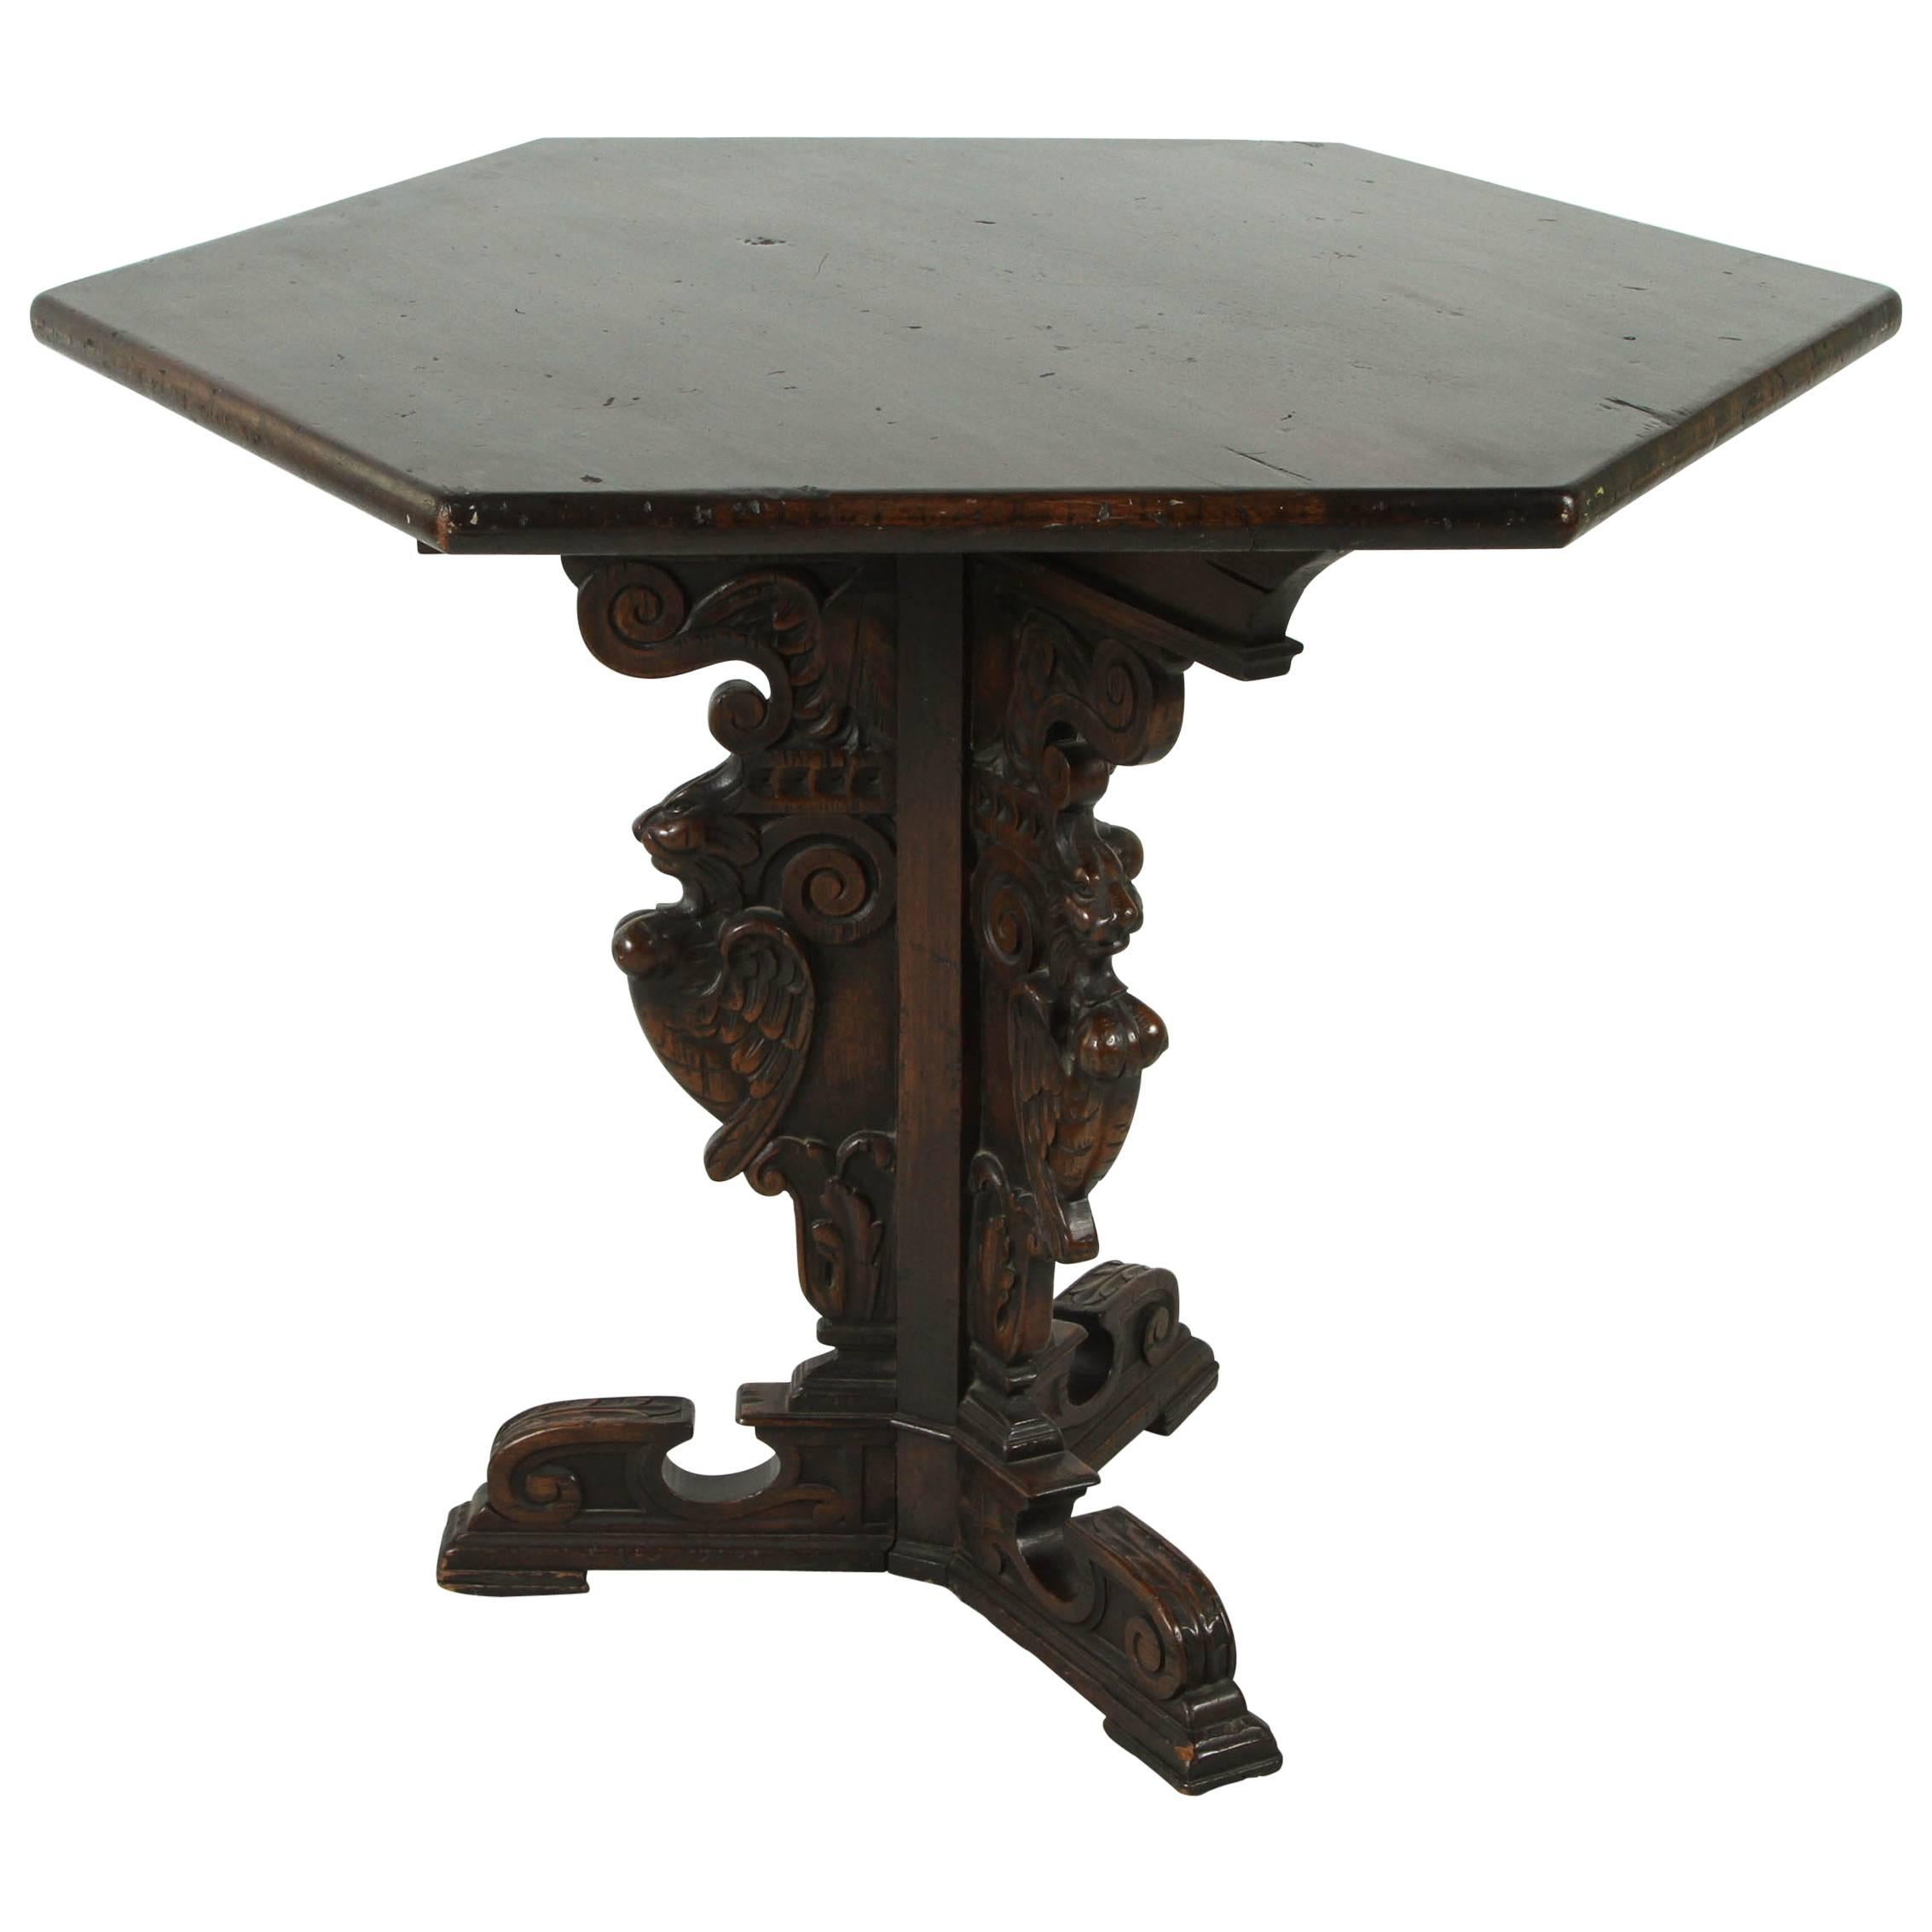 Spanish Pedestal Hexagonal Table with Ornate Details